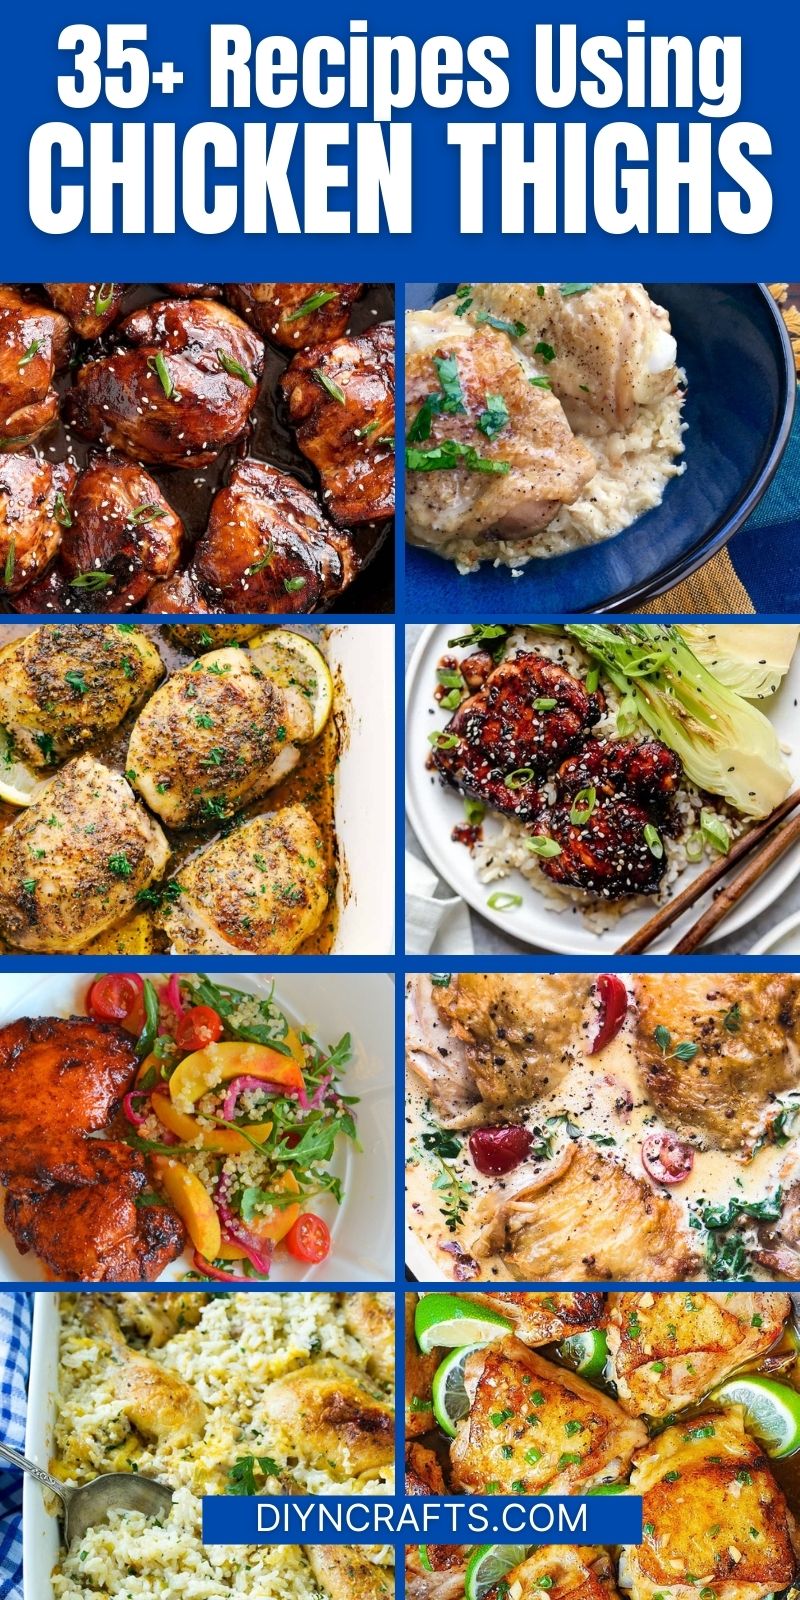 35 Flavorful Chicken Thighs Recipes for Easy Dinners - Scrambled Chefs